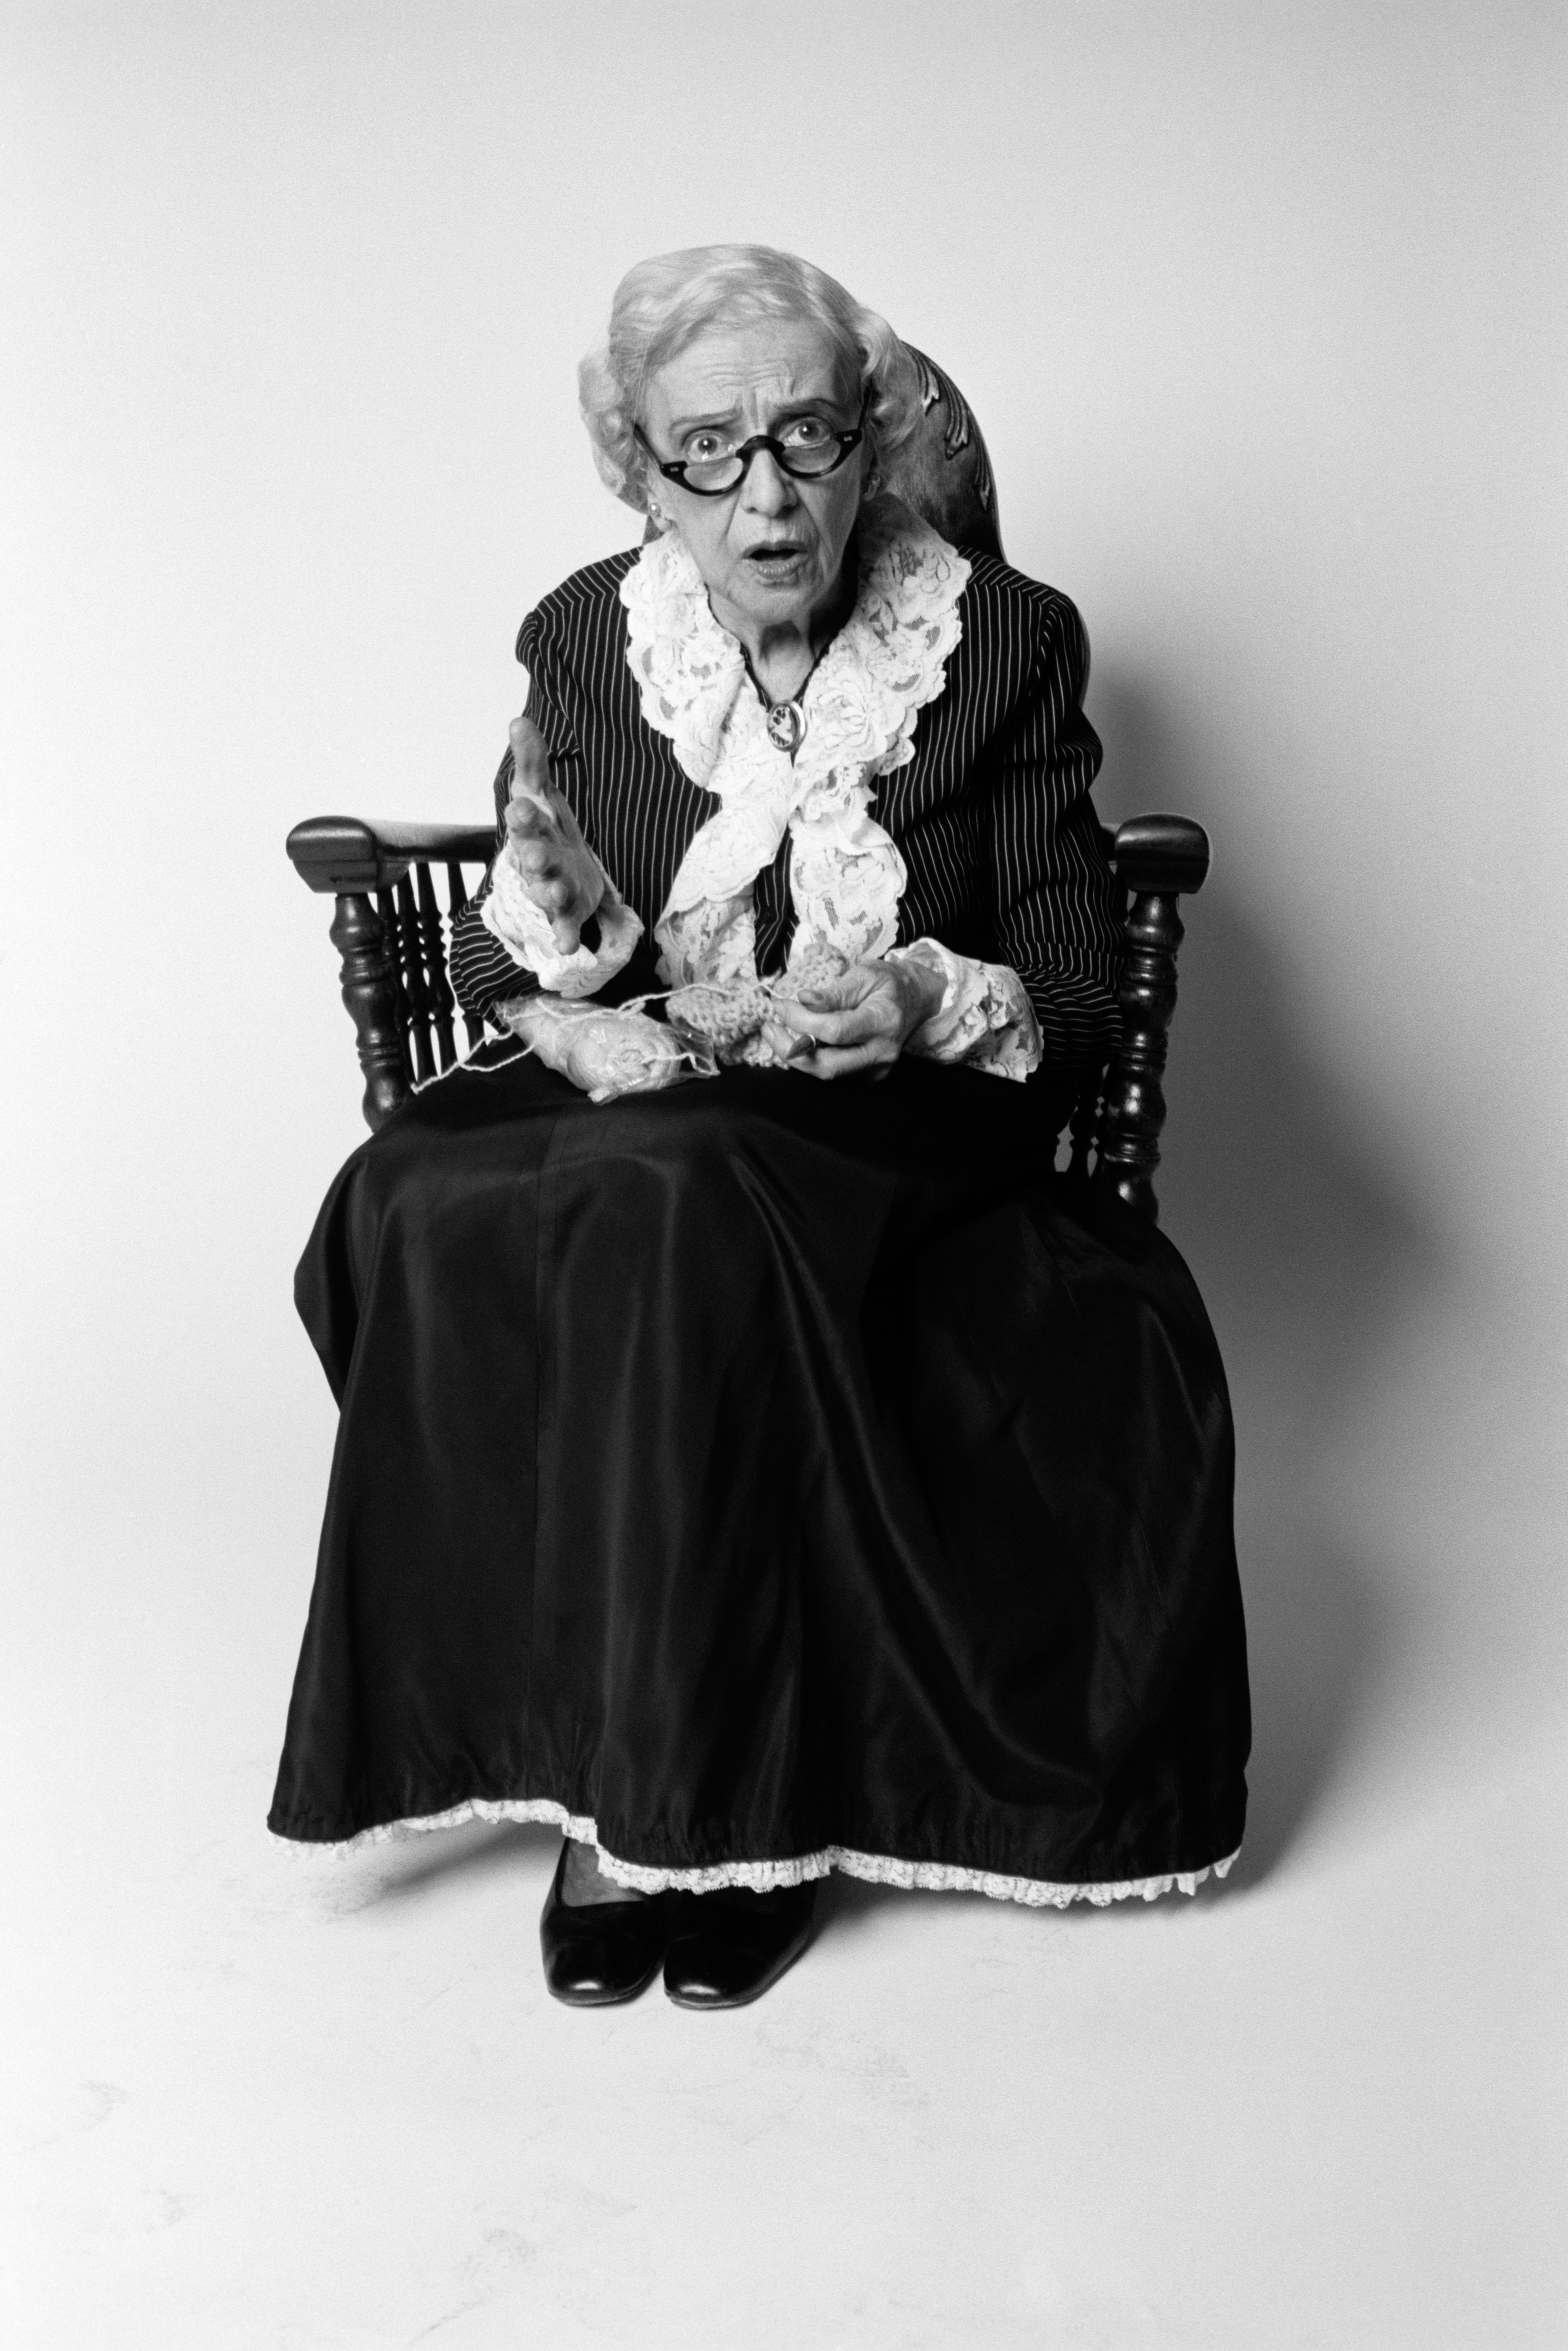 Shocked senior woman sitting in a chair with knitting in her lap | Source: Getty Images